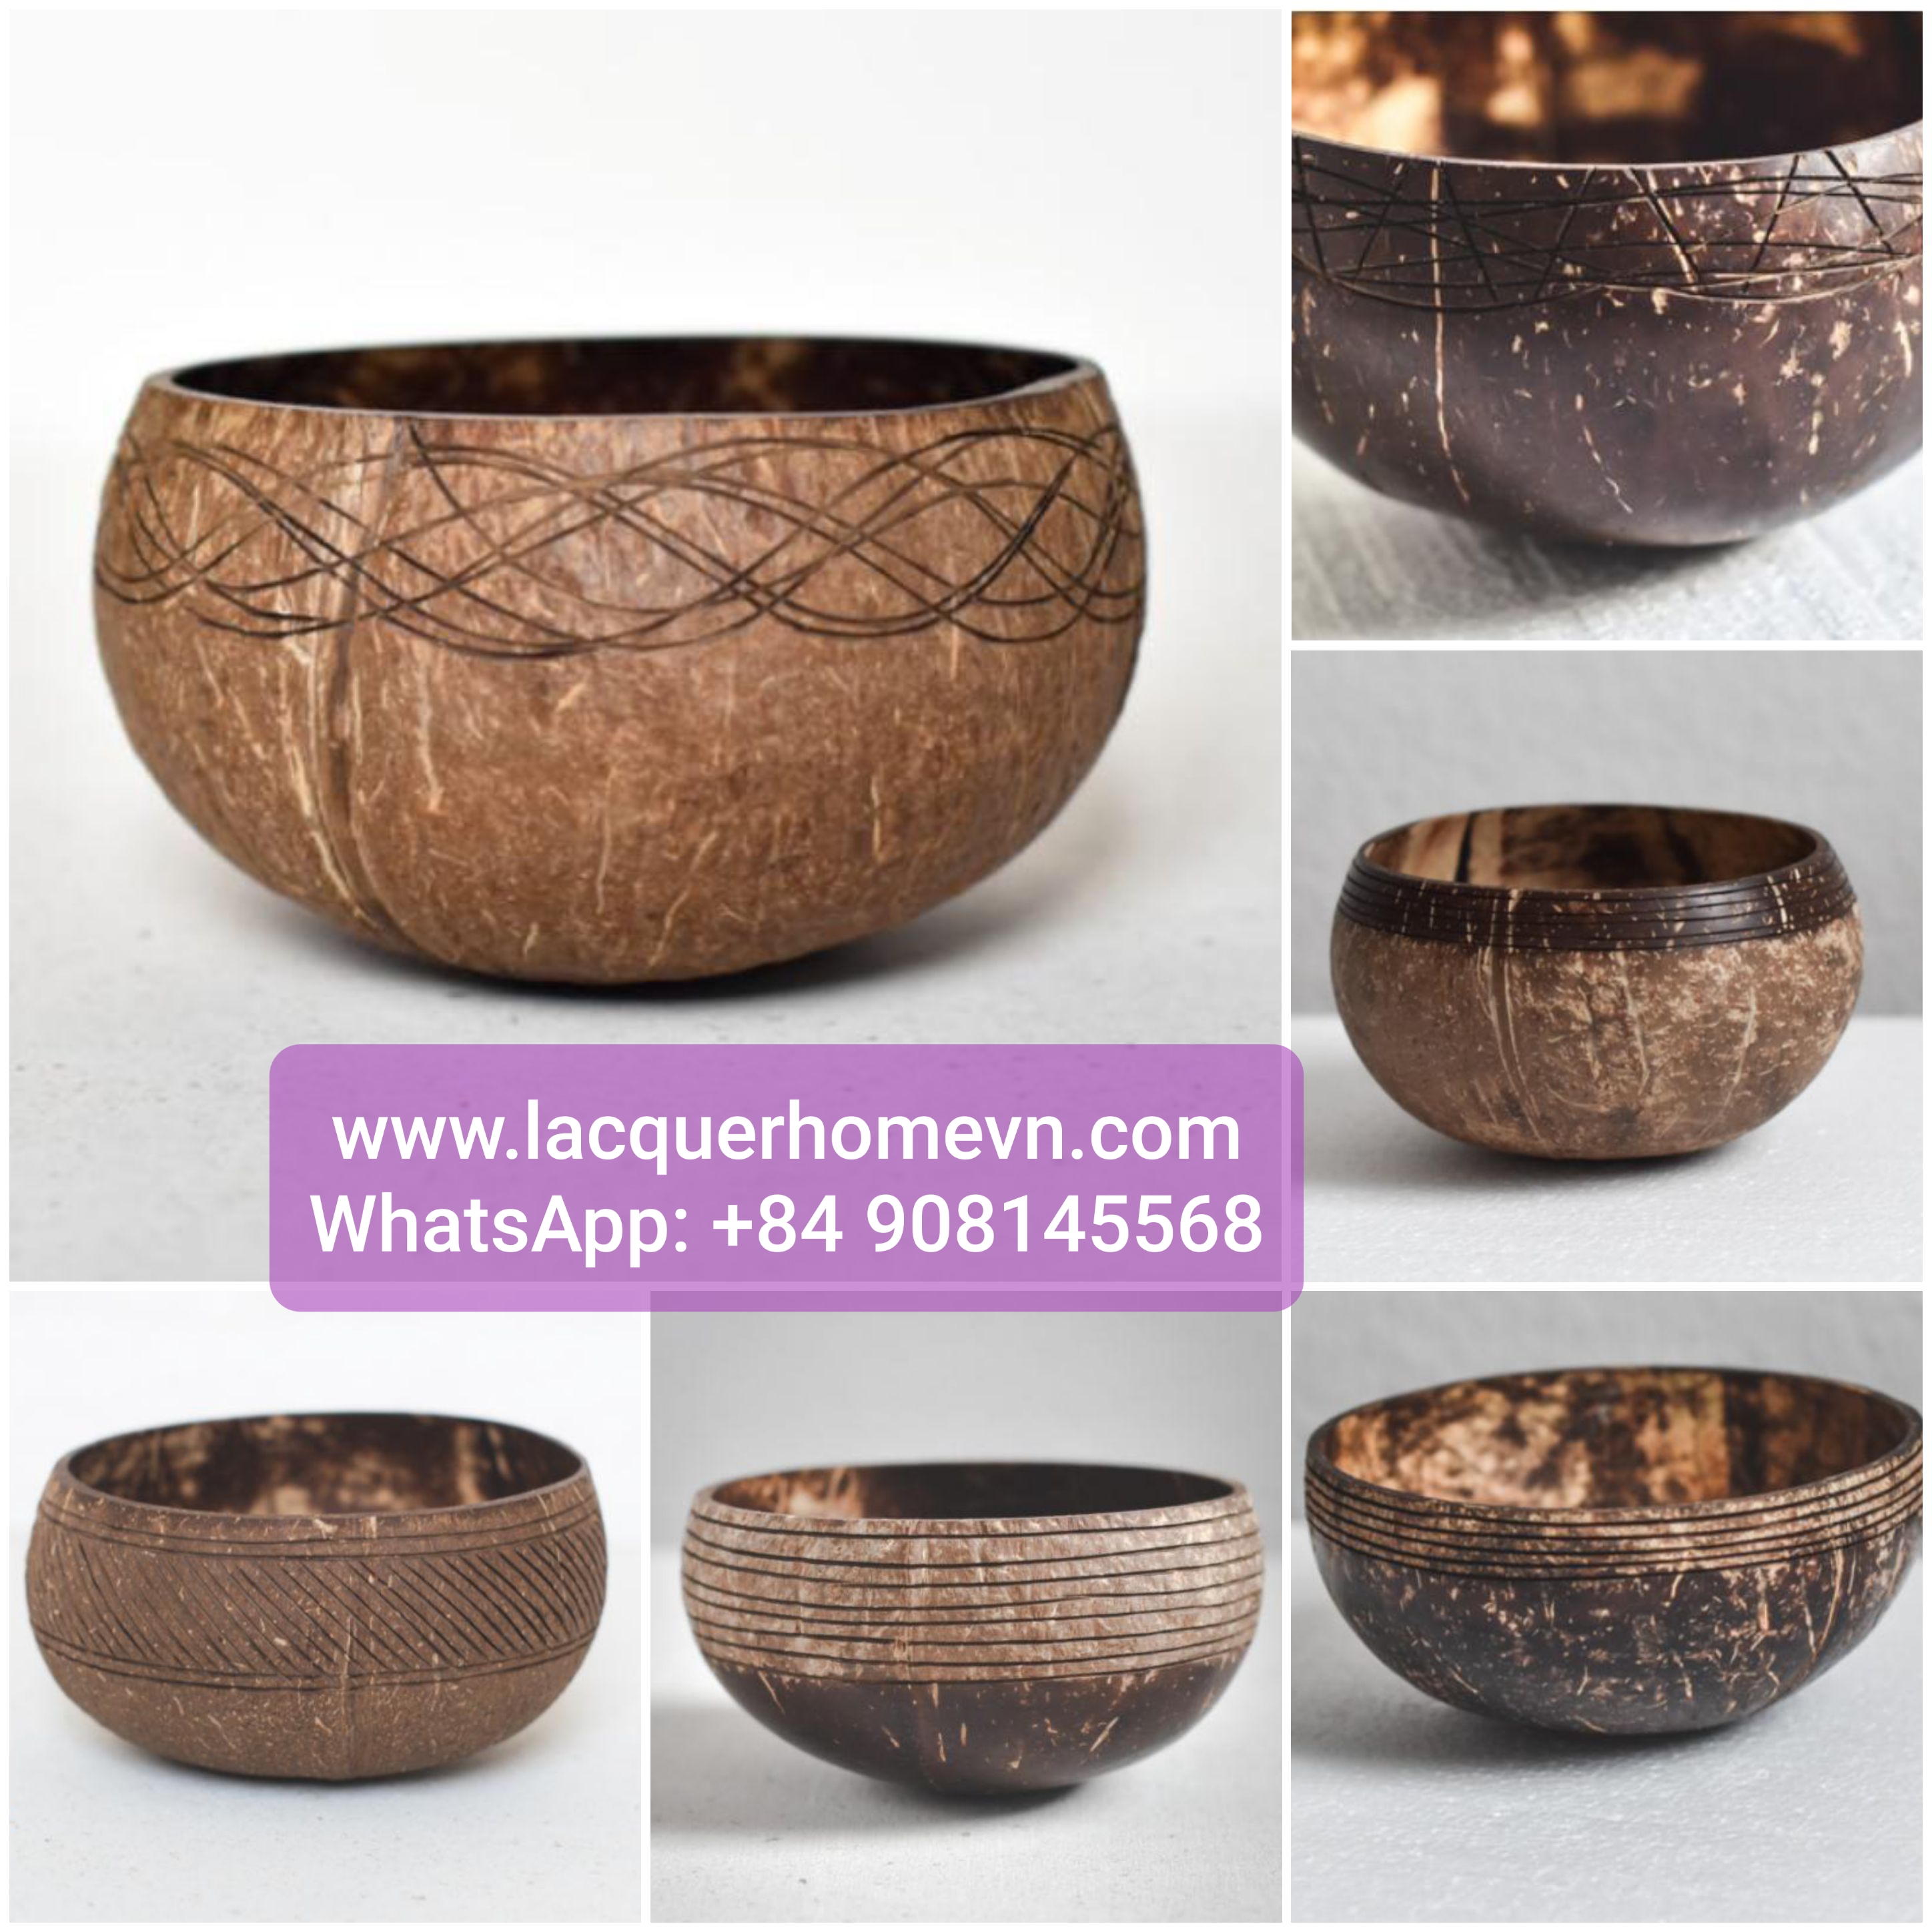 Details about   Eco bowl nice craft friendly COCONUT SHELL 100% natural ceylon pet feeder 